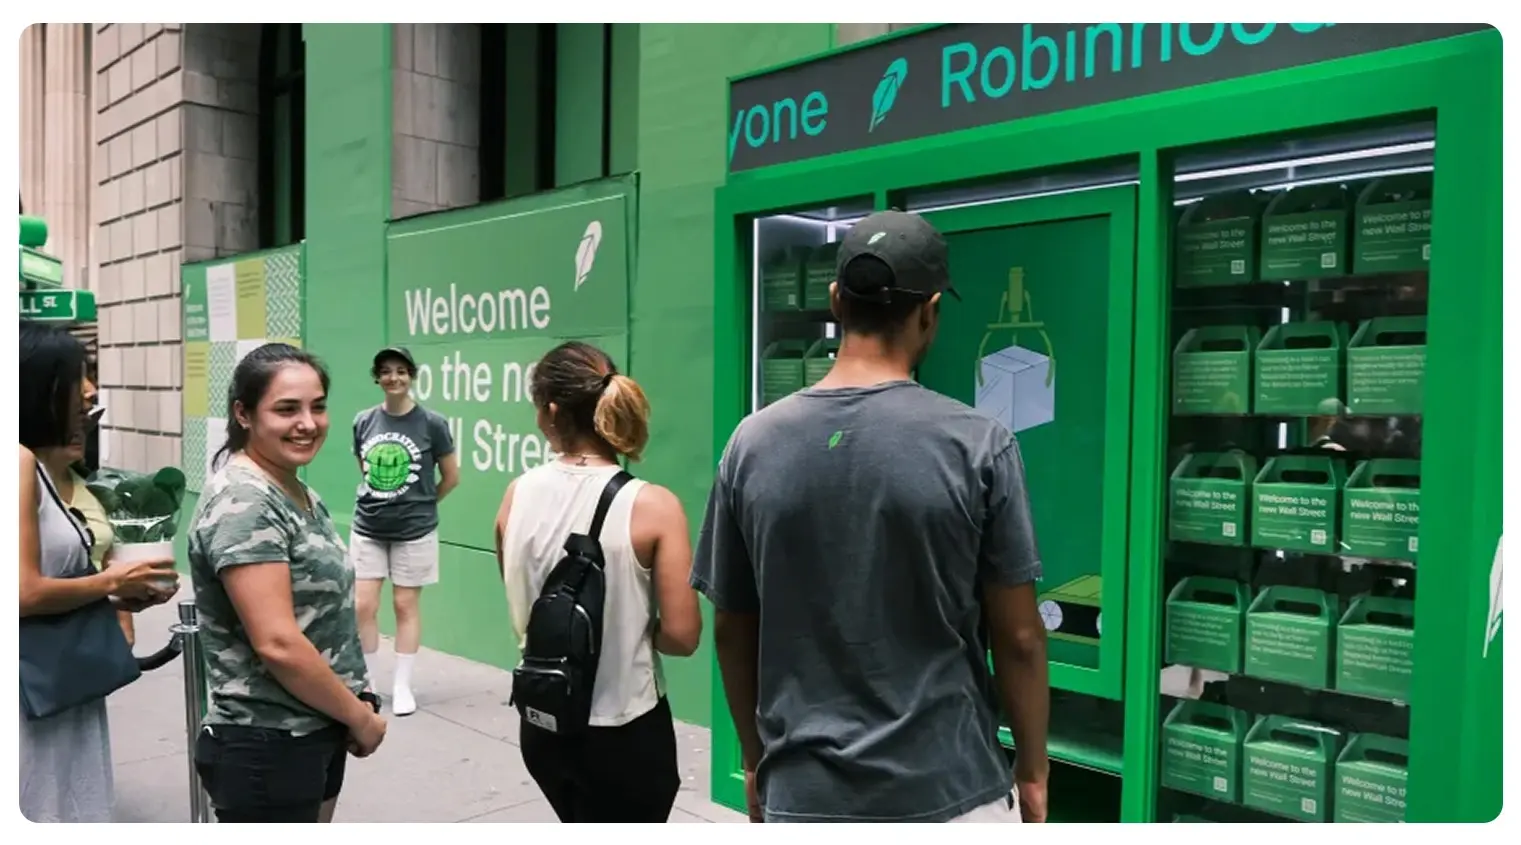 Robinhood vending machine for his product and people queuing